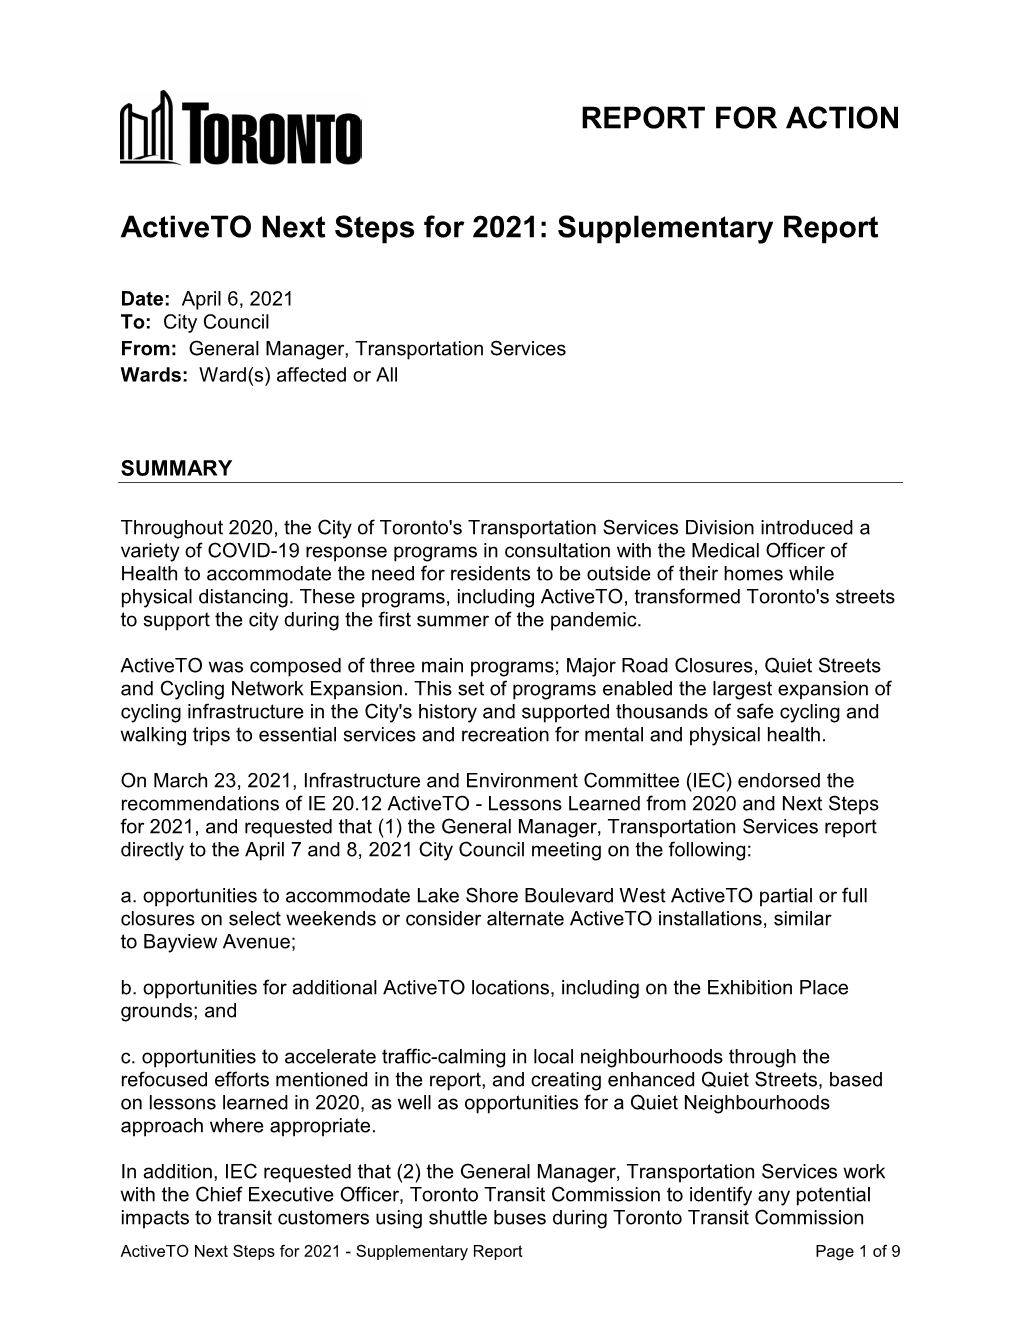 Activeto Next Steps for 2021: Supplementary Report